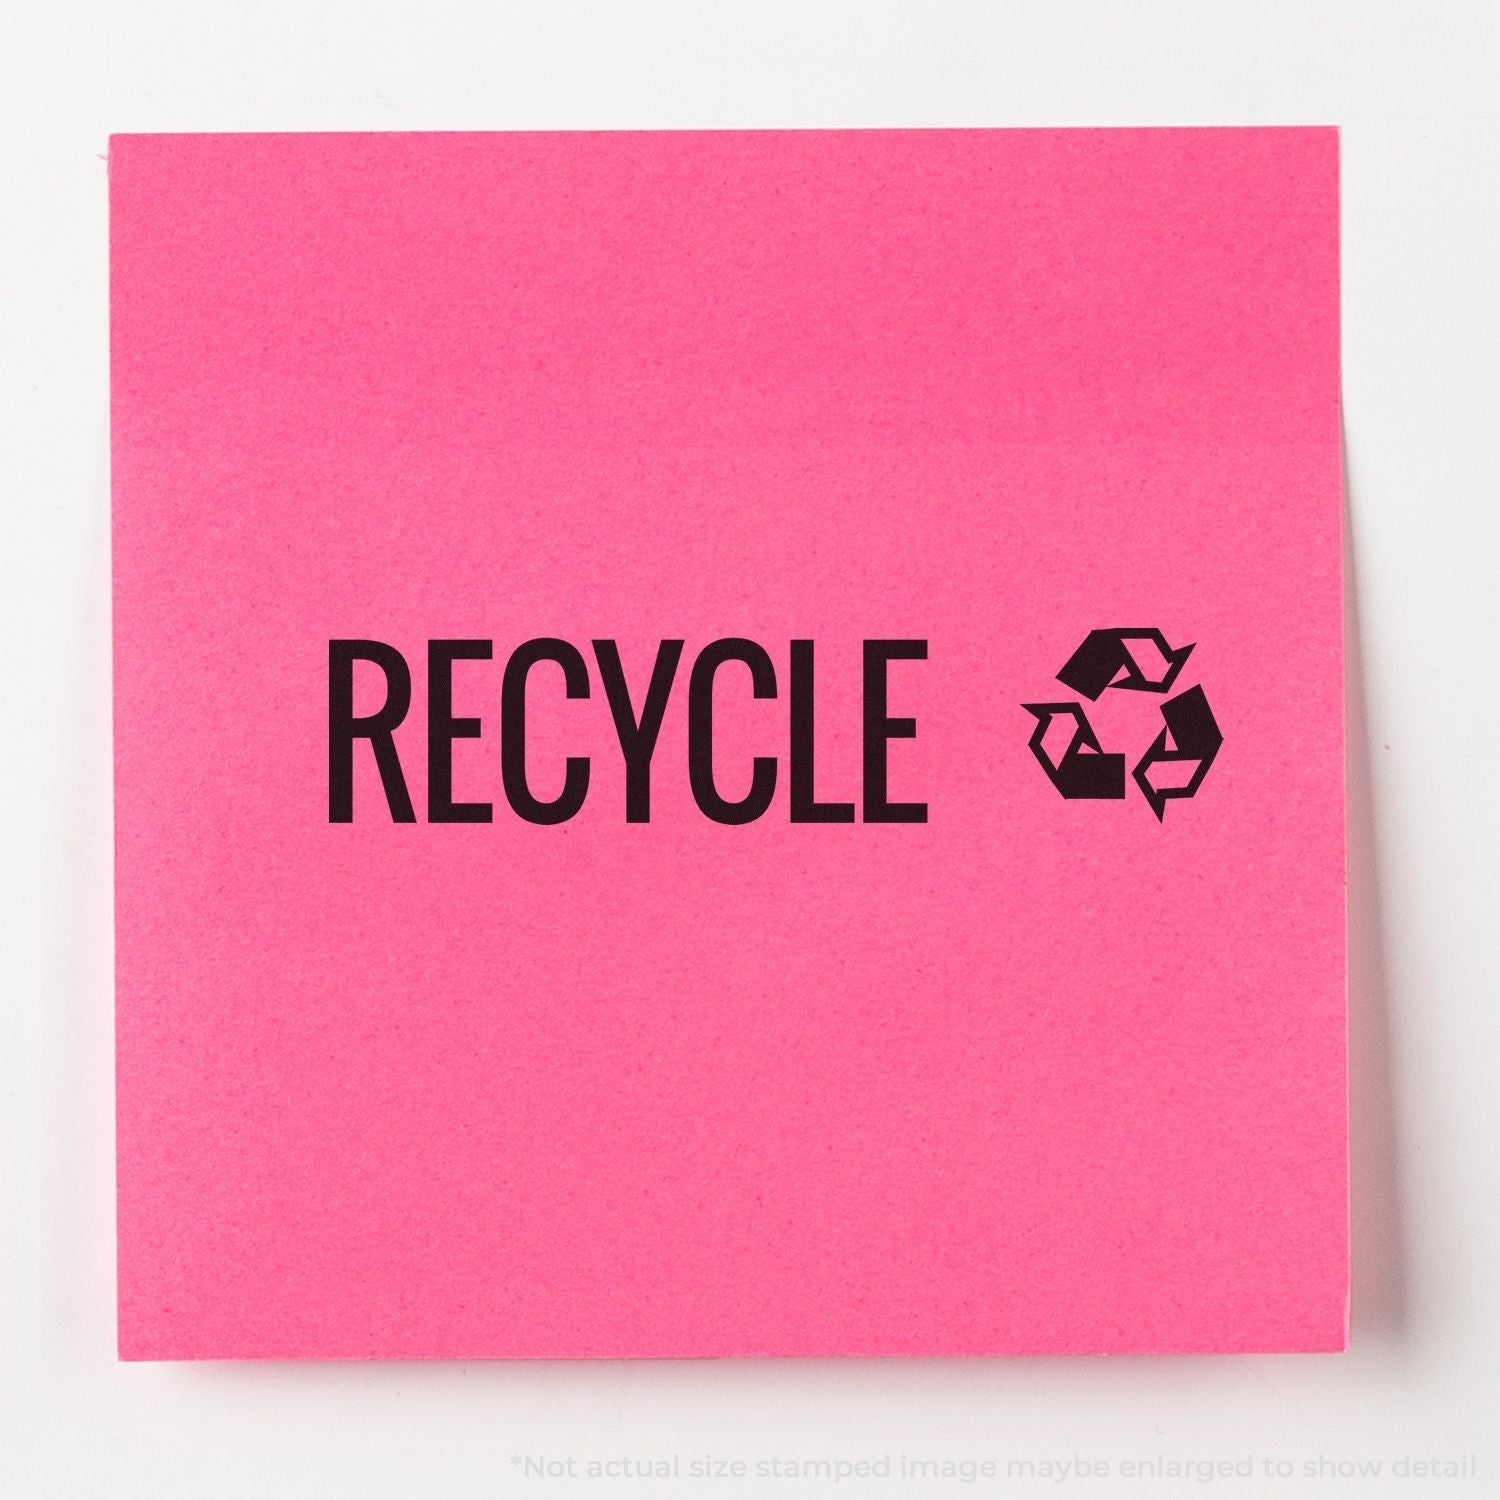 A self-inking stamp with a stamped image showing how the text "RECYCLE" with the recycling icon on the right side is displayed after stamping.